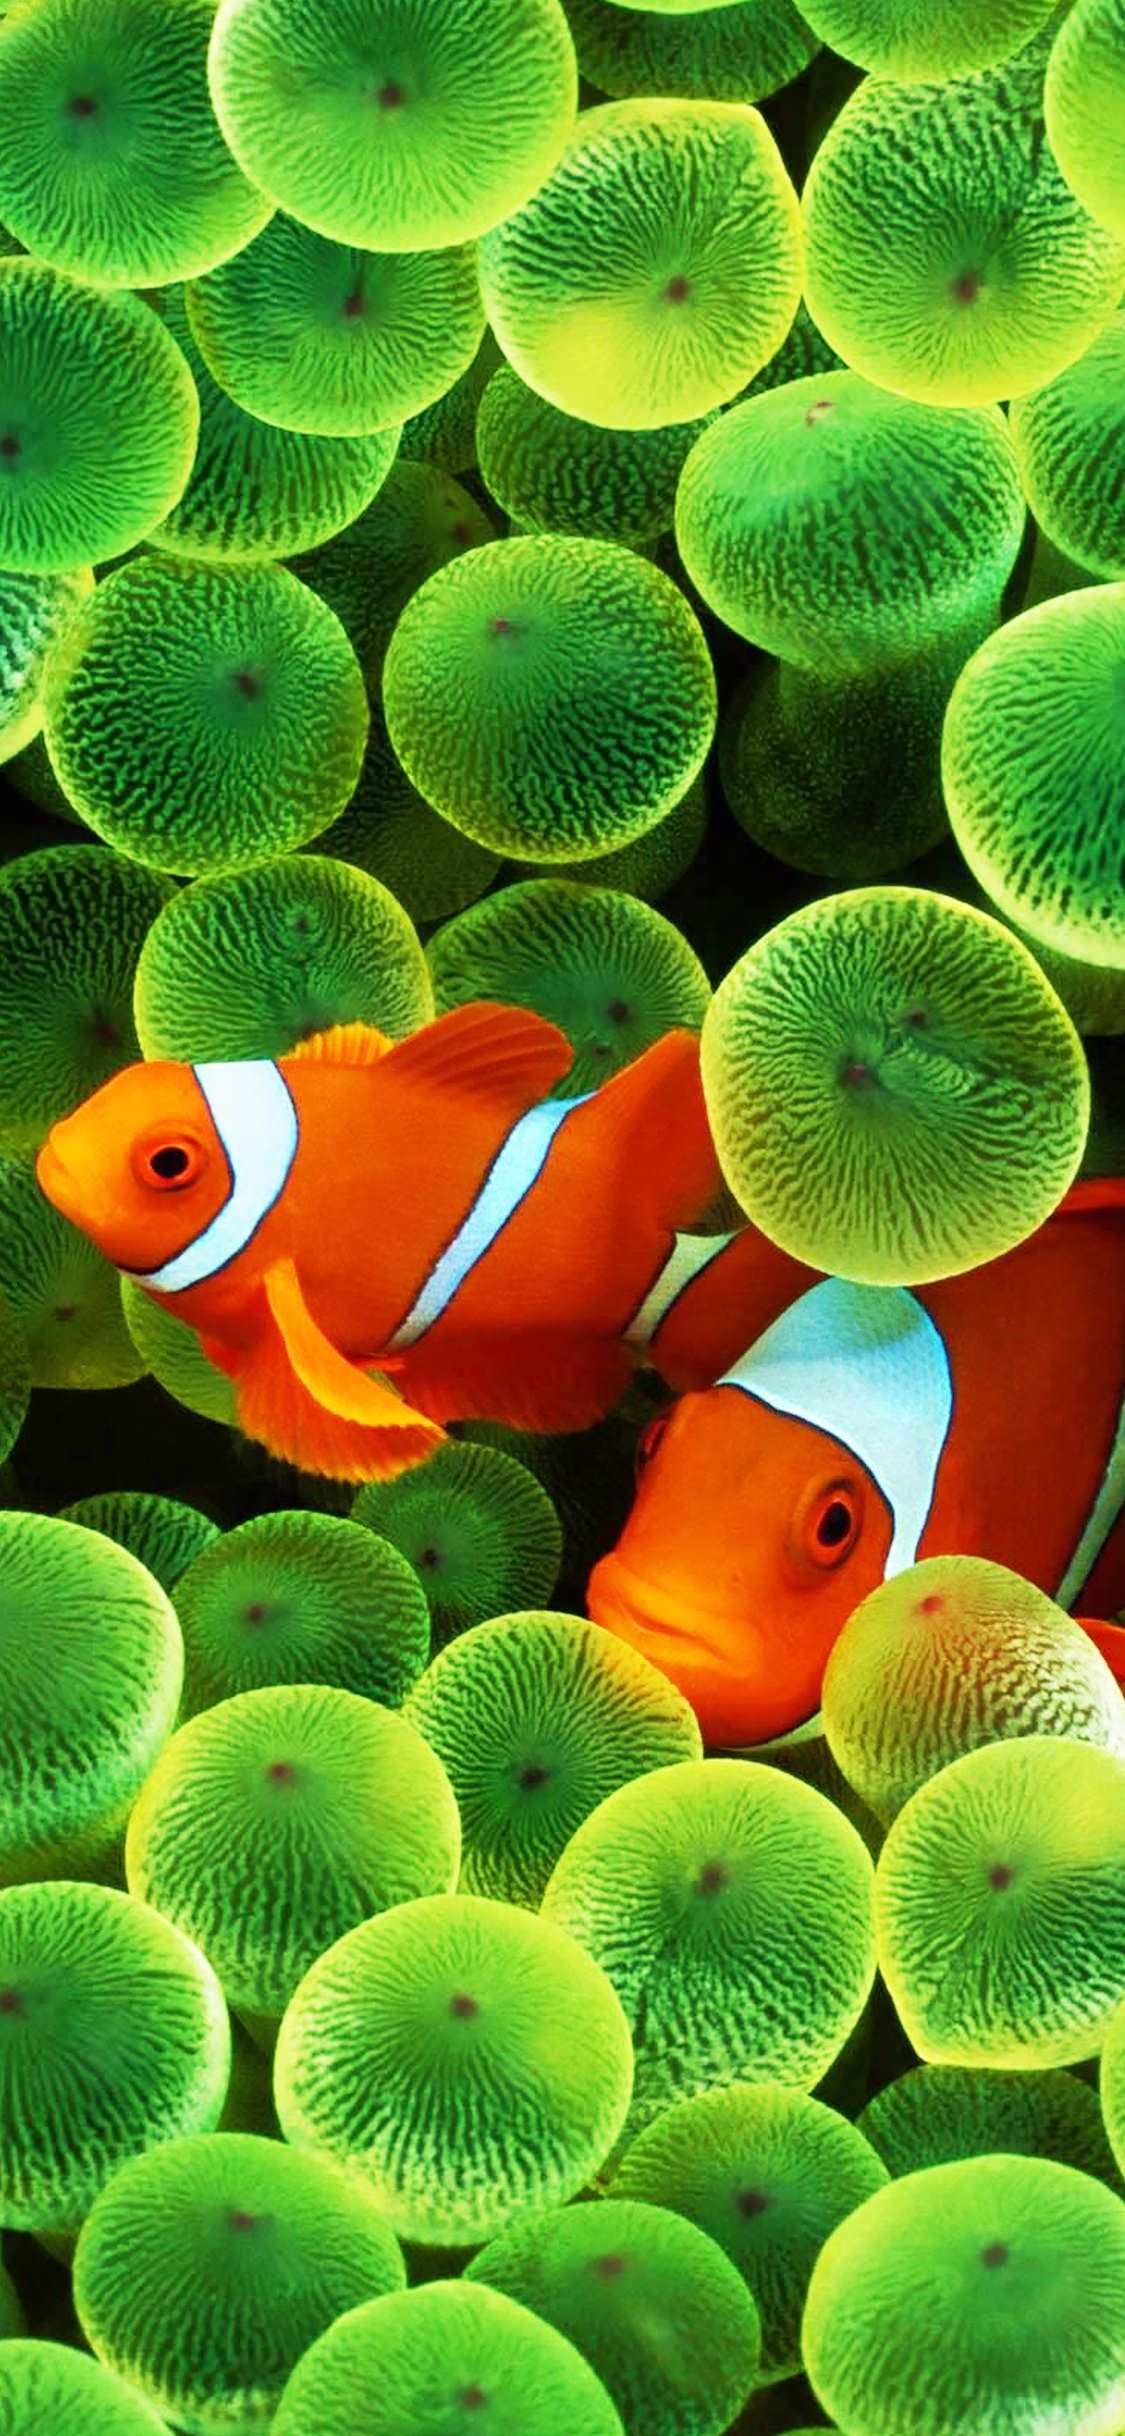 Clown Fish: Omnivorous species, Can feed on undigested food from their host anemones. 1130x2440 HD Wallpaper.